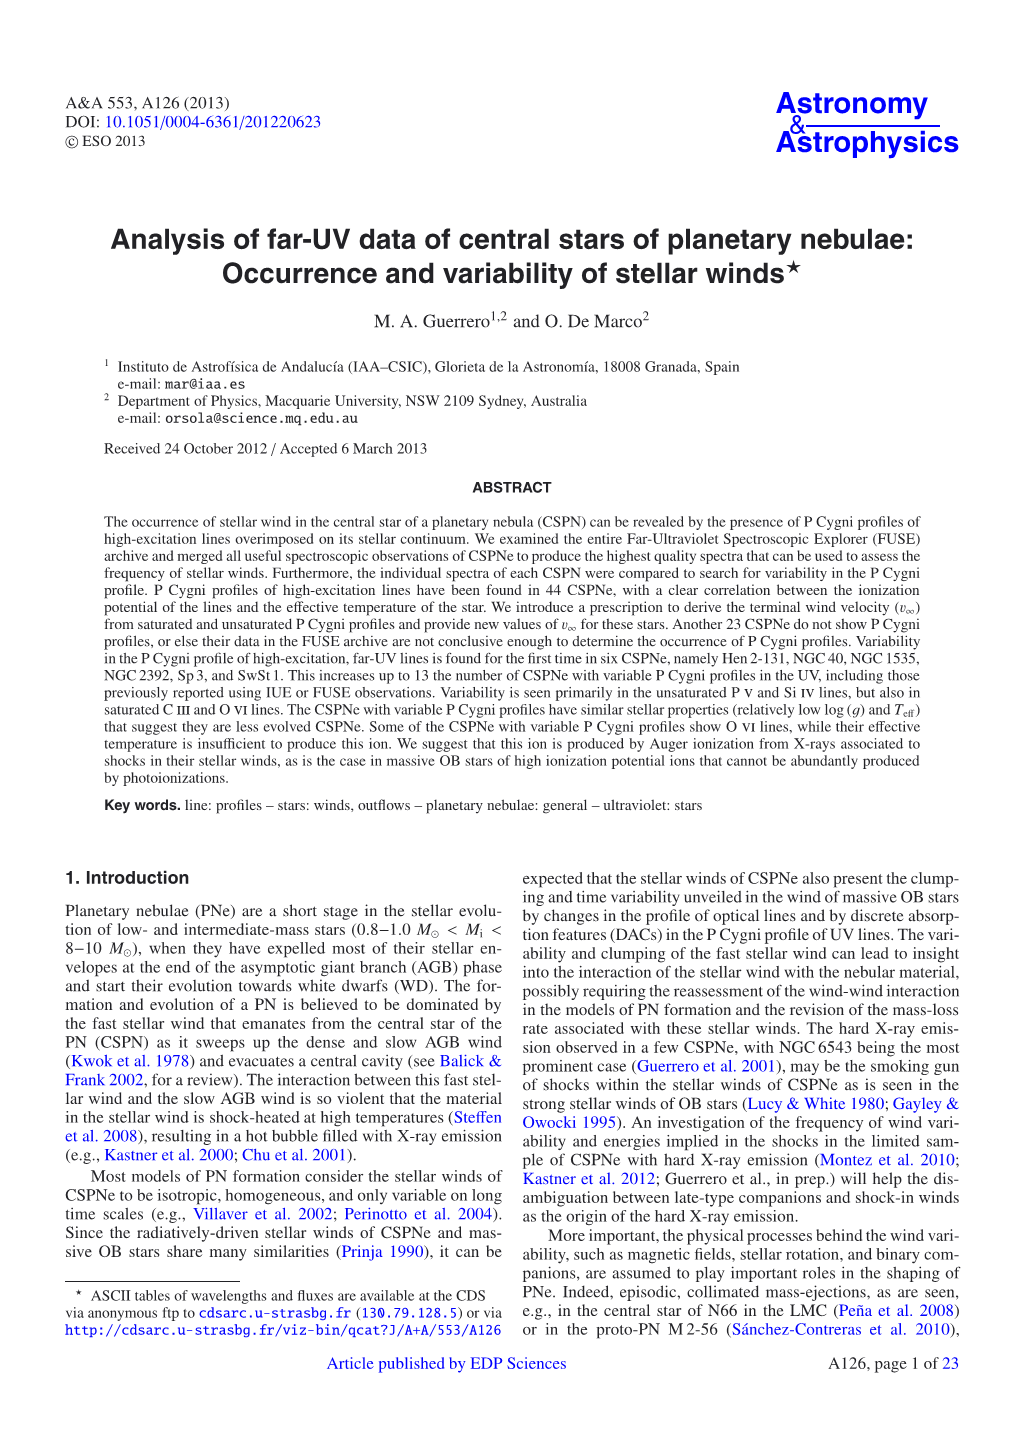 Analysis of Far-UV Data of Central Stars of Planetary Nebulae: Occurrence and Variability of Stellar Winds